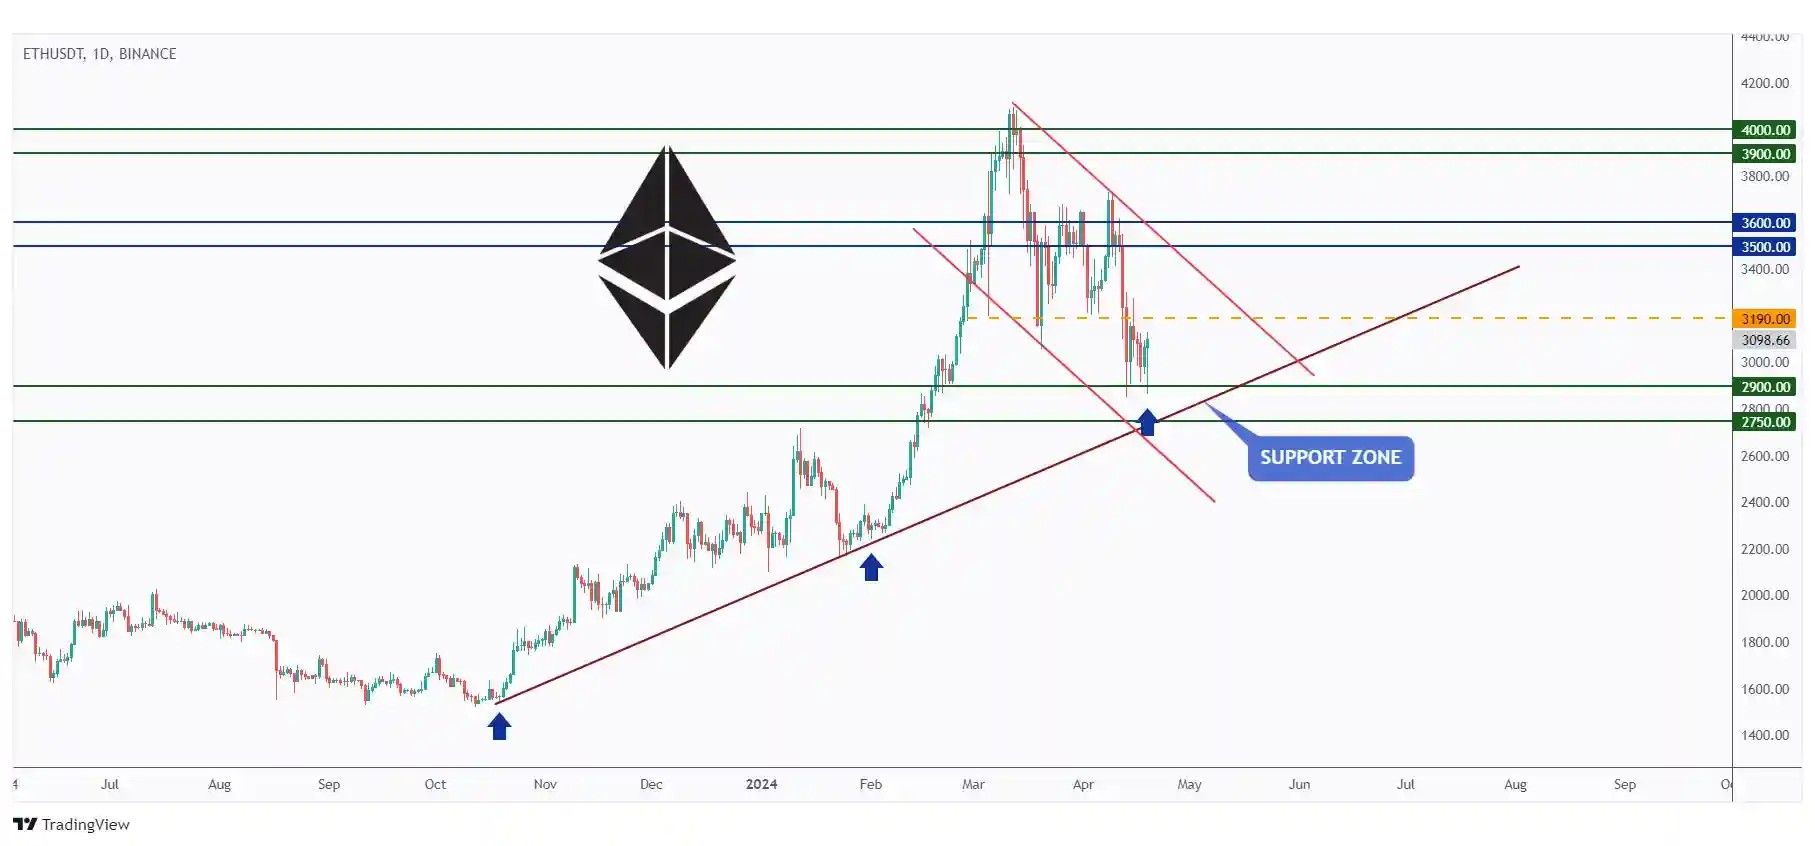 ETH DAILY chart finding support around a massive rejection zone which is the intersection of two trendlines and a demand zone at $2,900.